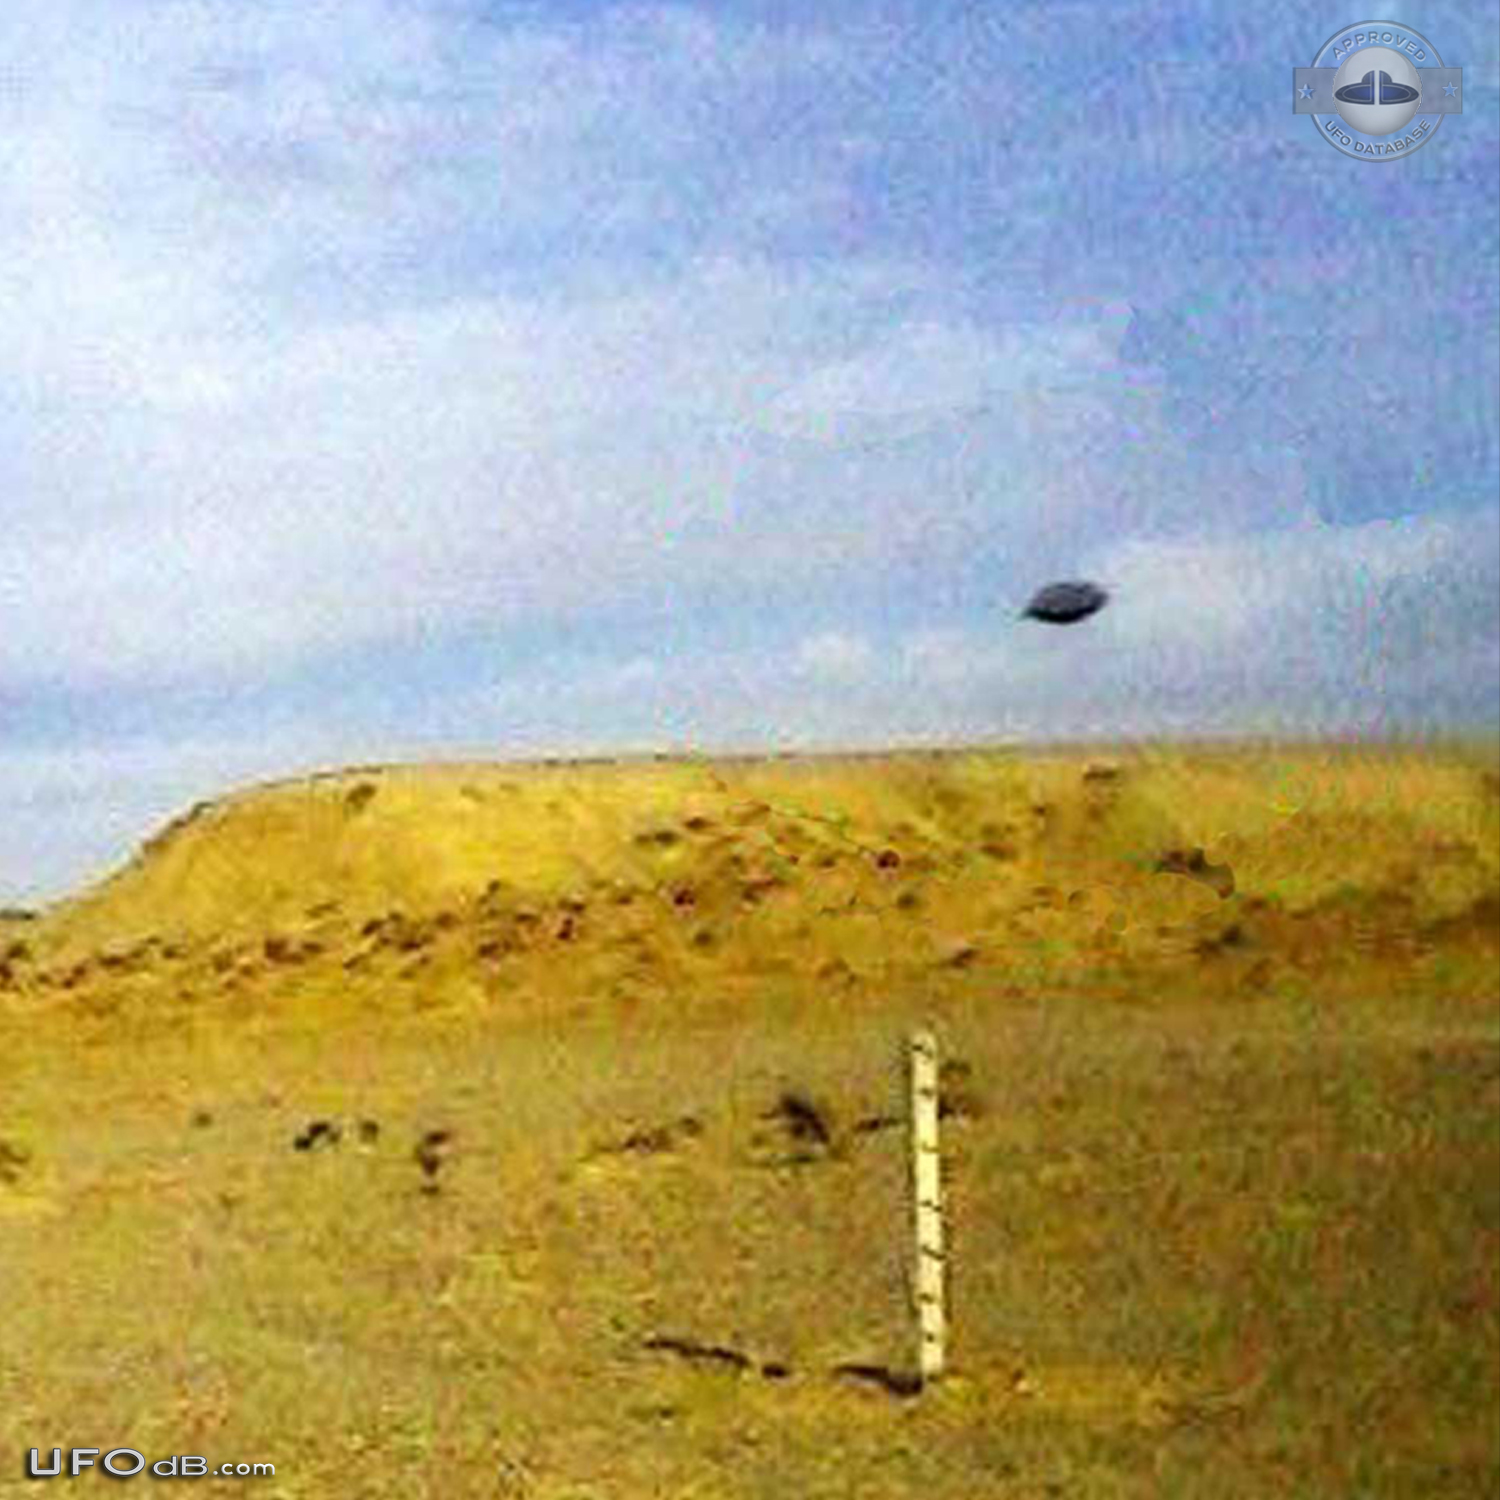 UFO in inner Mulei Mongolia, China caught on picture in November 2008 UFO Picture #439-3